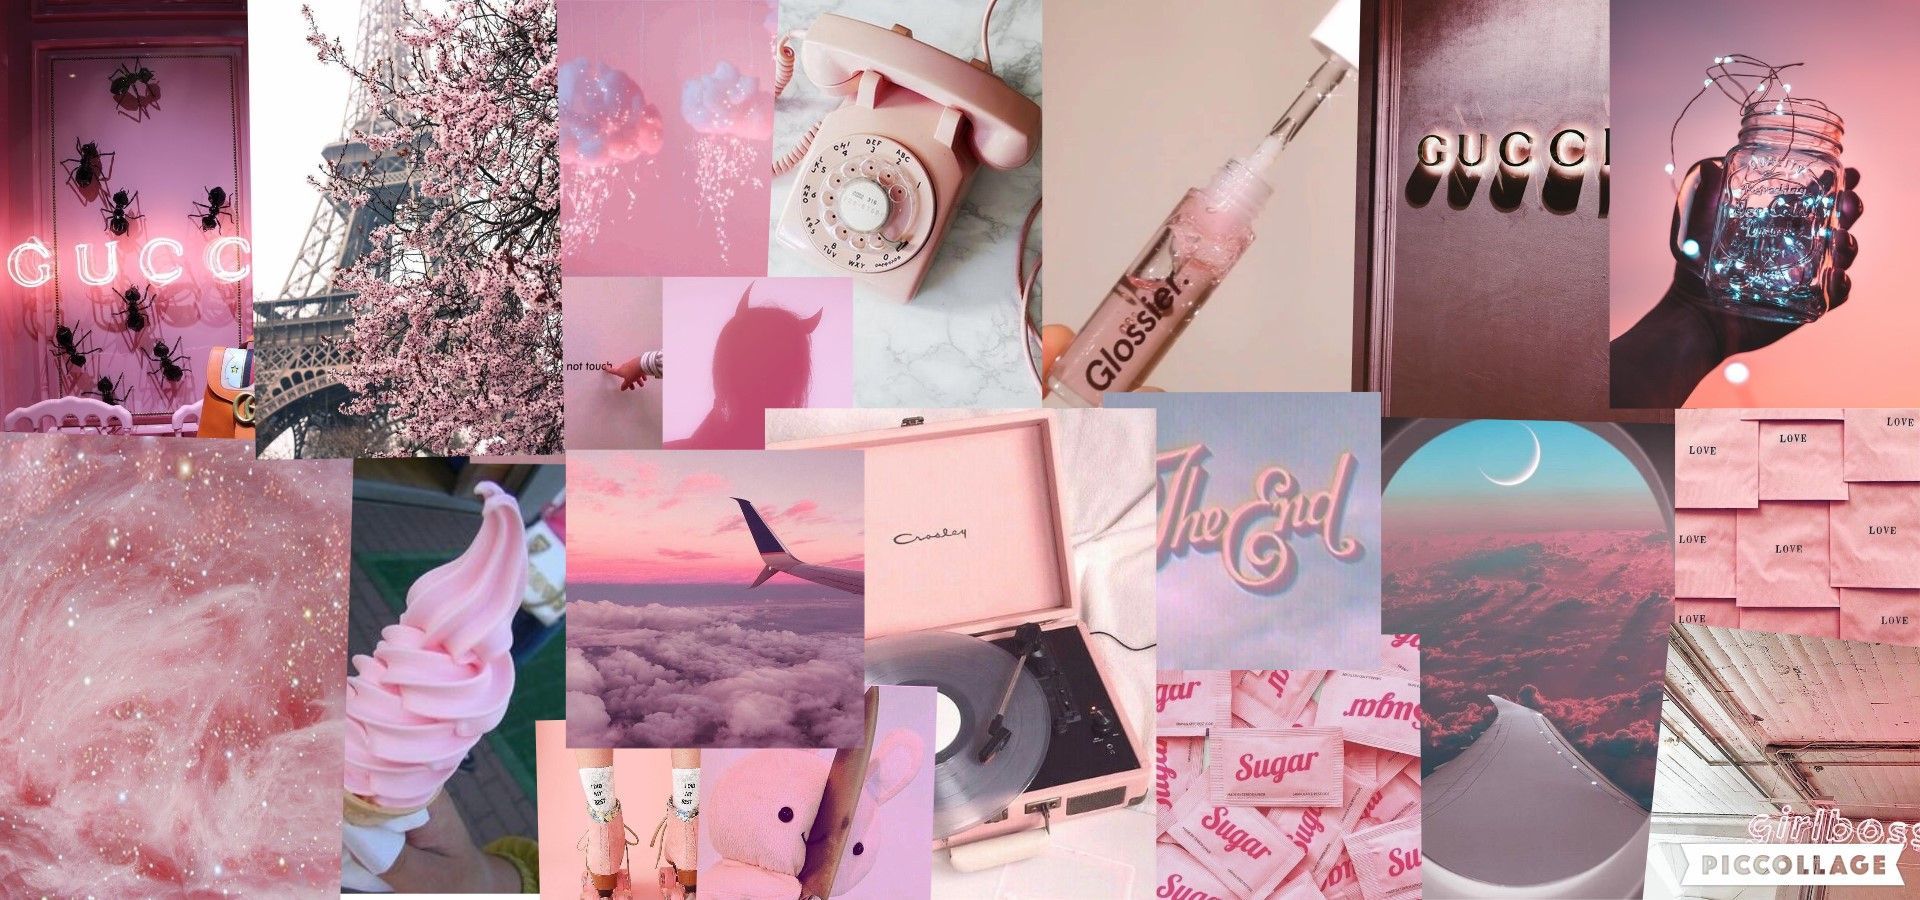 Aesthetic collage of pink and white photos. - Pink collage, Gucci, pink